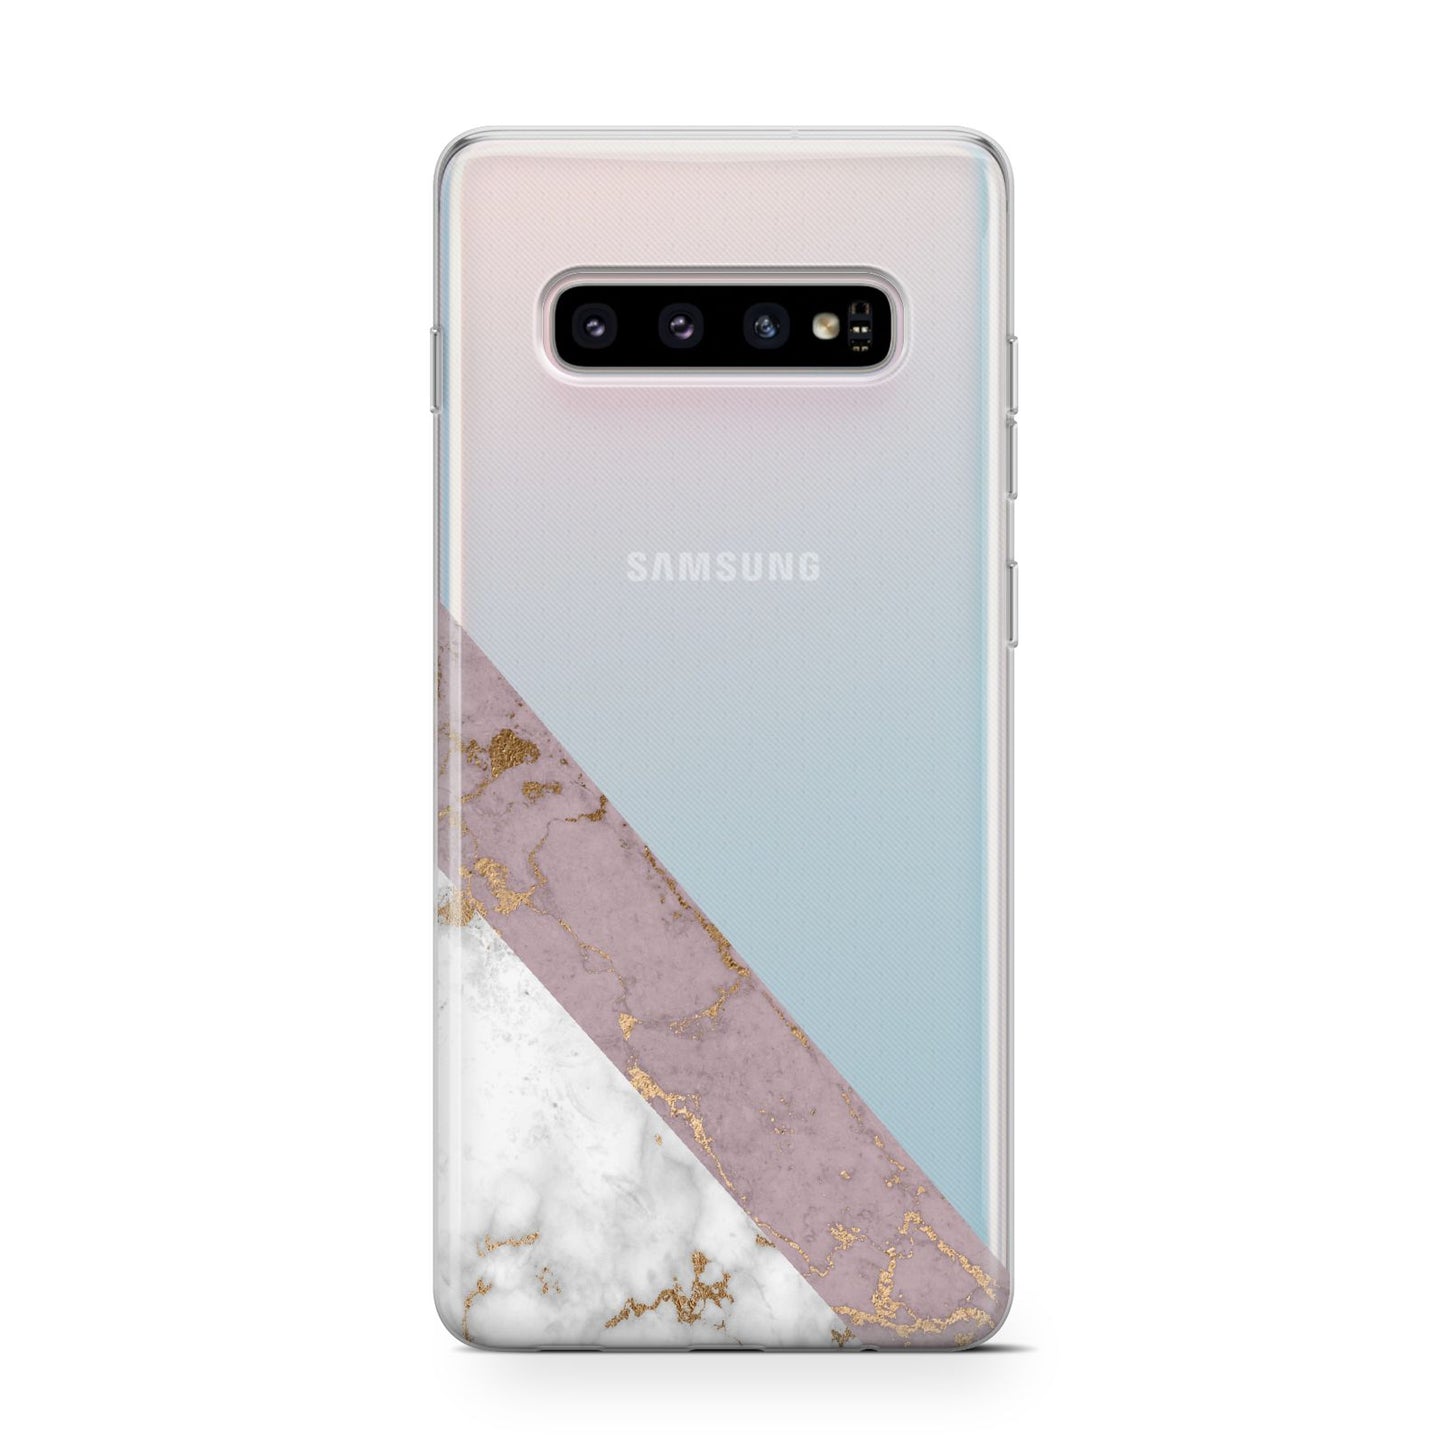 Transparent Pink and White Marble Samsung Galaxy S10 Case